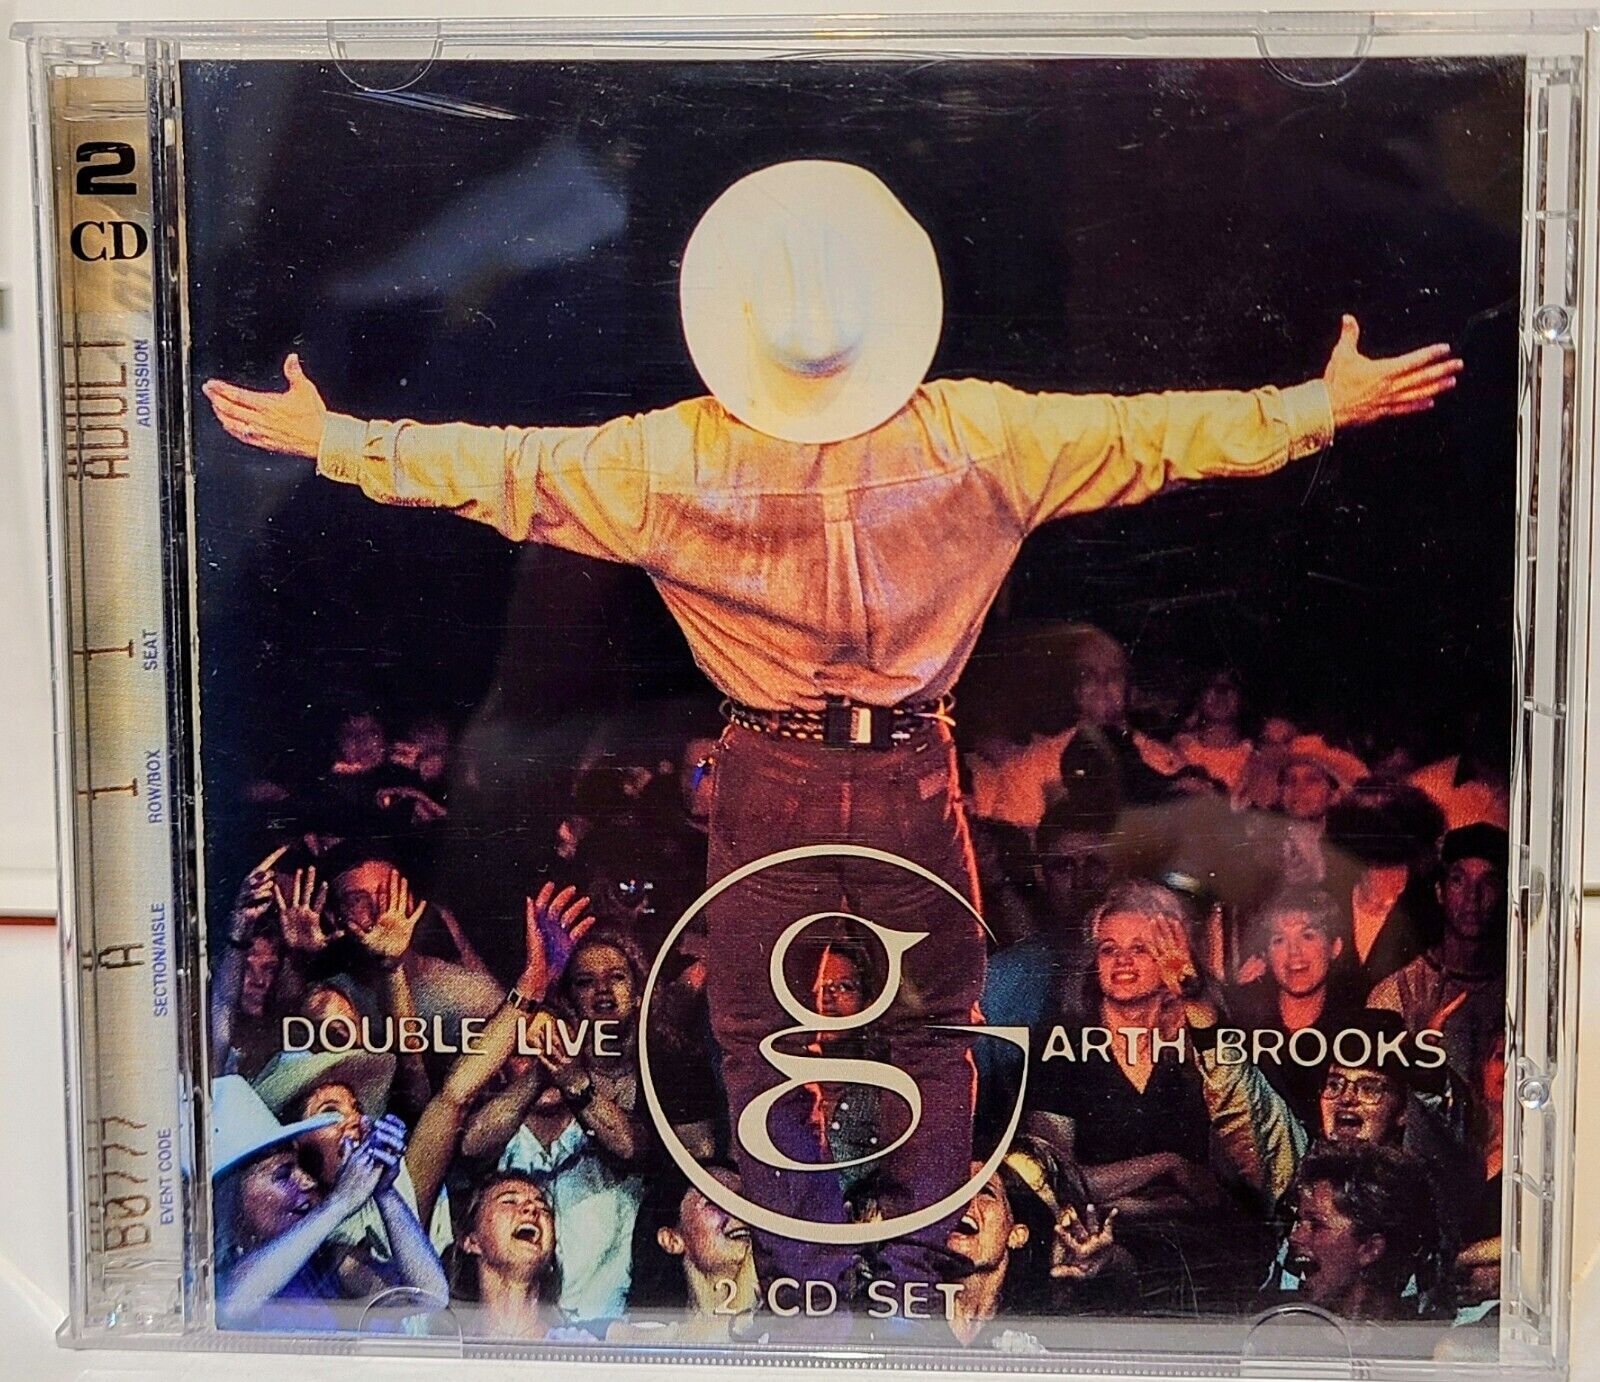 GARTH BROOKS DOUBLE LIVE CD LIMITED COMMEMORATIVE PACKAGE WORLD TOUR II  '95-'96 724349742420